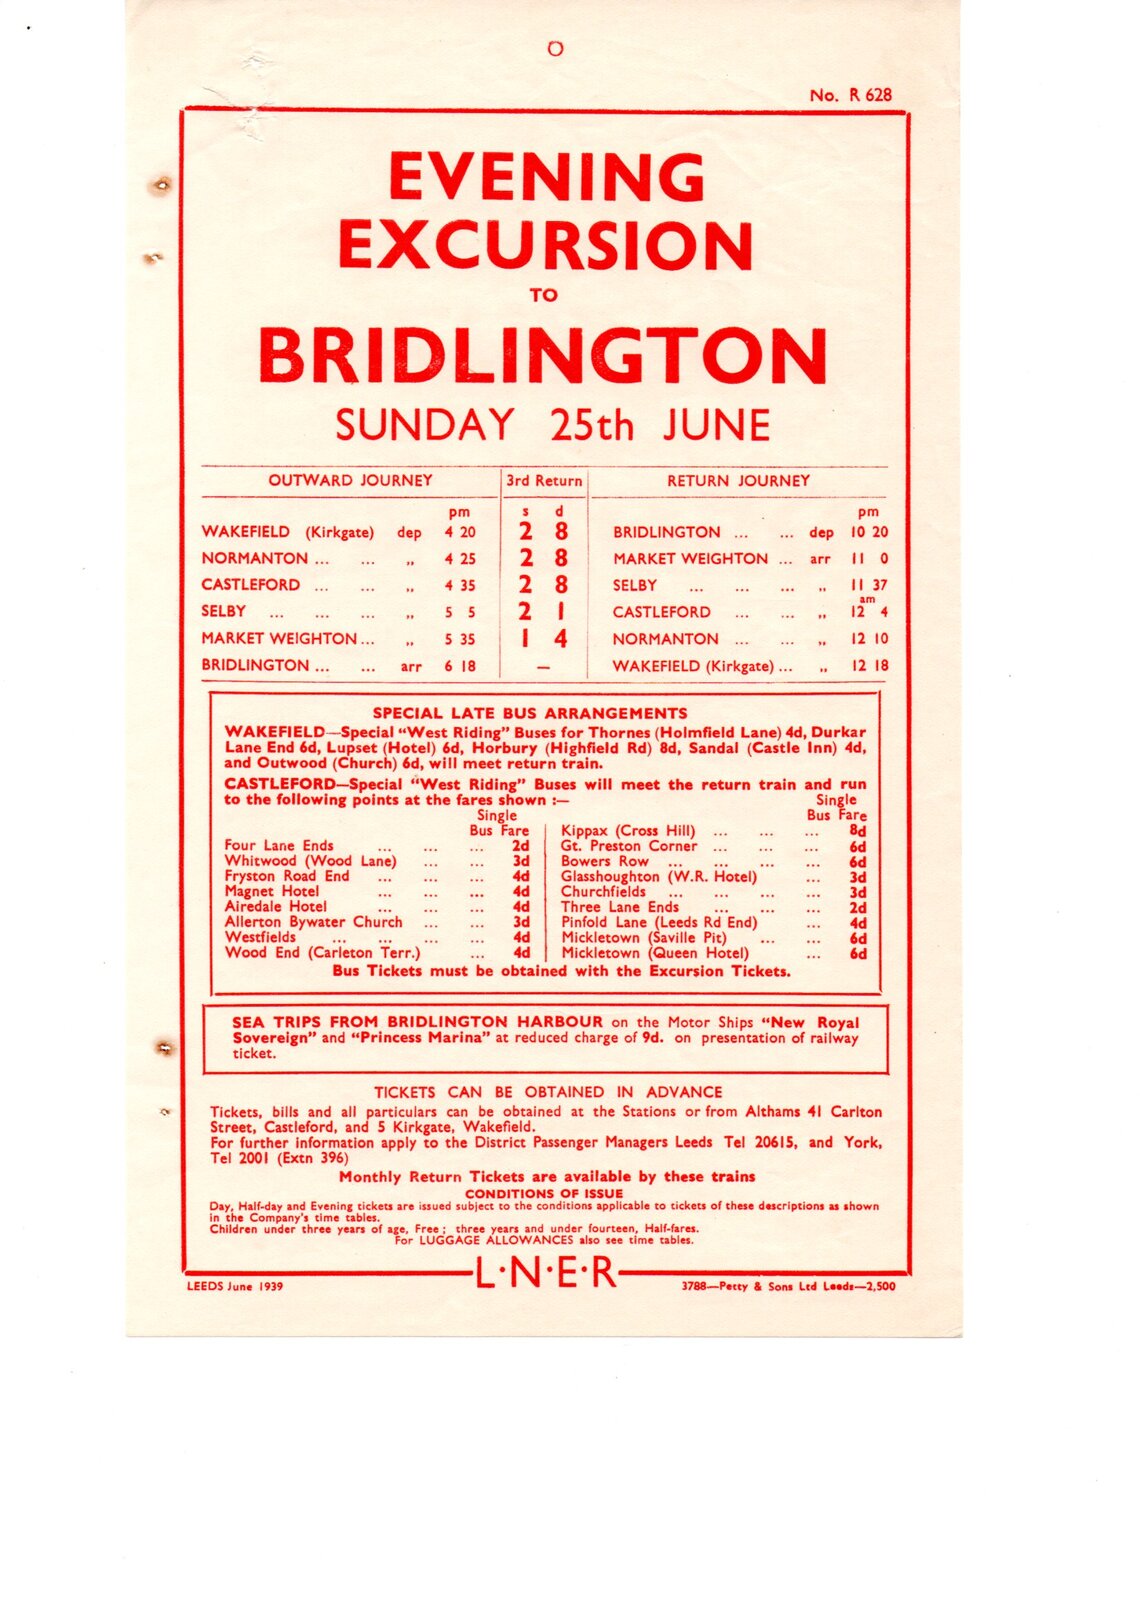 Evening Excursion to Bridlington from Wakefield Kirkgate and Normanton 25th June 1939